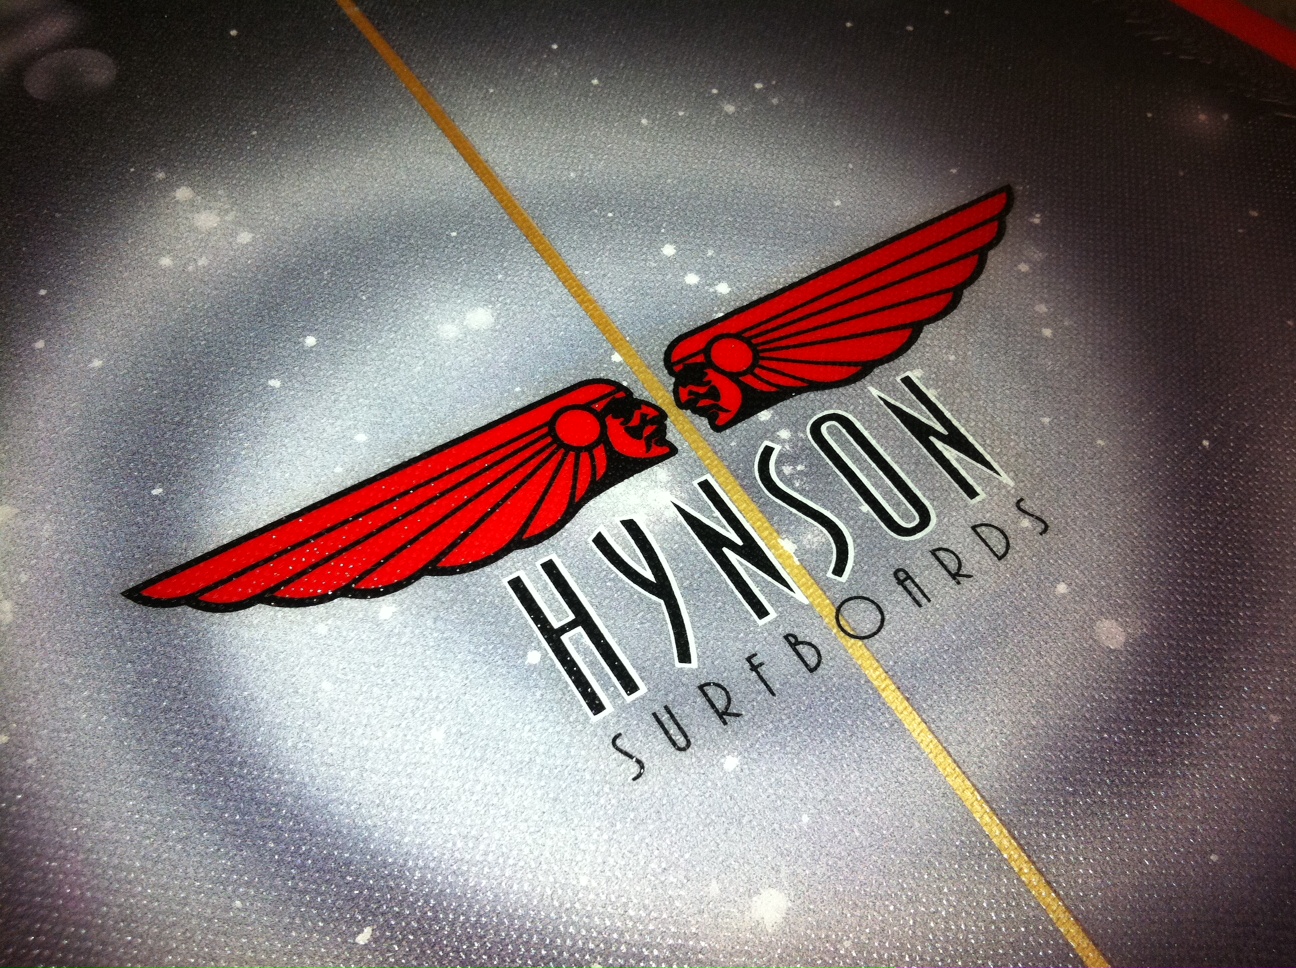 Olive T-Shirt SURFING WING Logos Mike Hynson Surfboards 